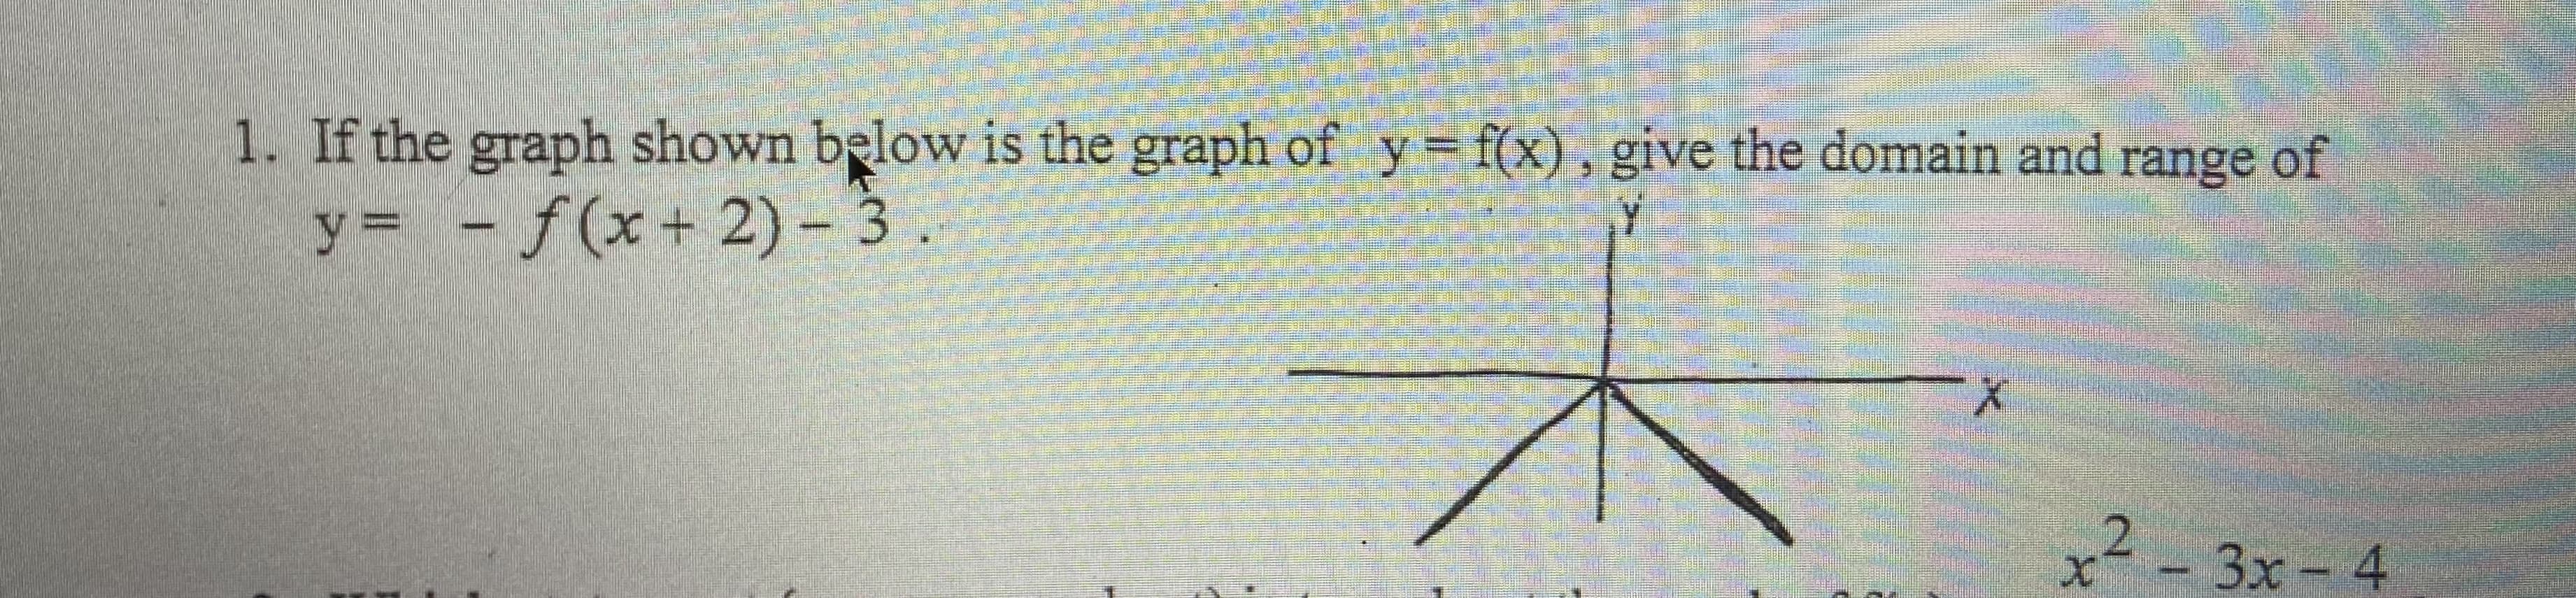 1. If the graph shown below is the graph of y= f(x), give the domain and range of
y= - f(x+2)- 3.
x²- 3x-4
2.
